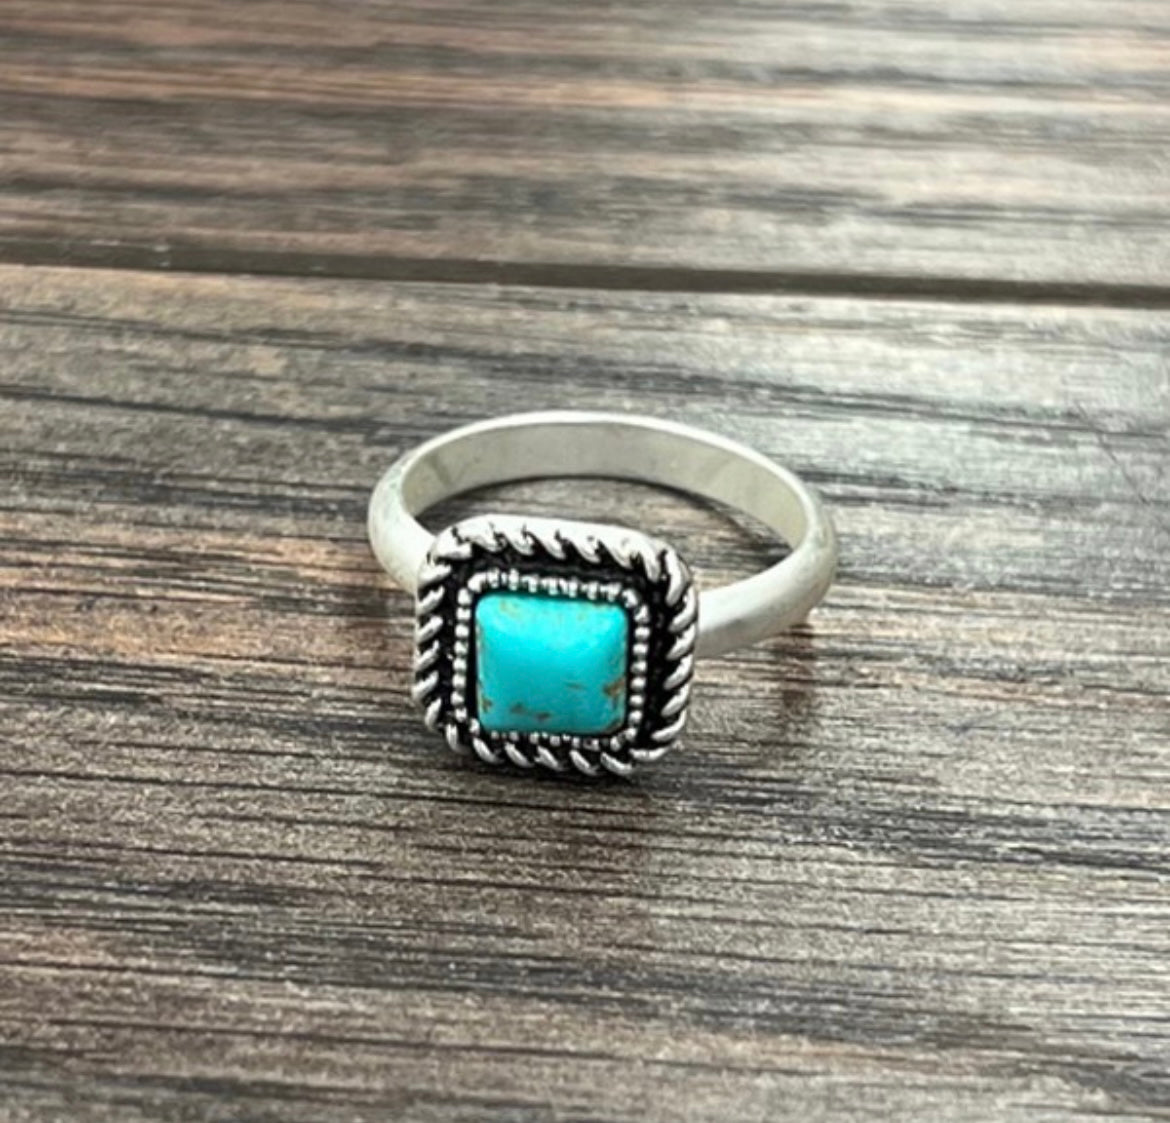 Fashion Vintage Square Turquoise Stones Rings for Men Feather Carving  Indian Accessories Jewelry Bague Masculine Cool Band Gift